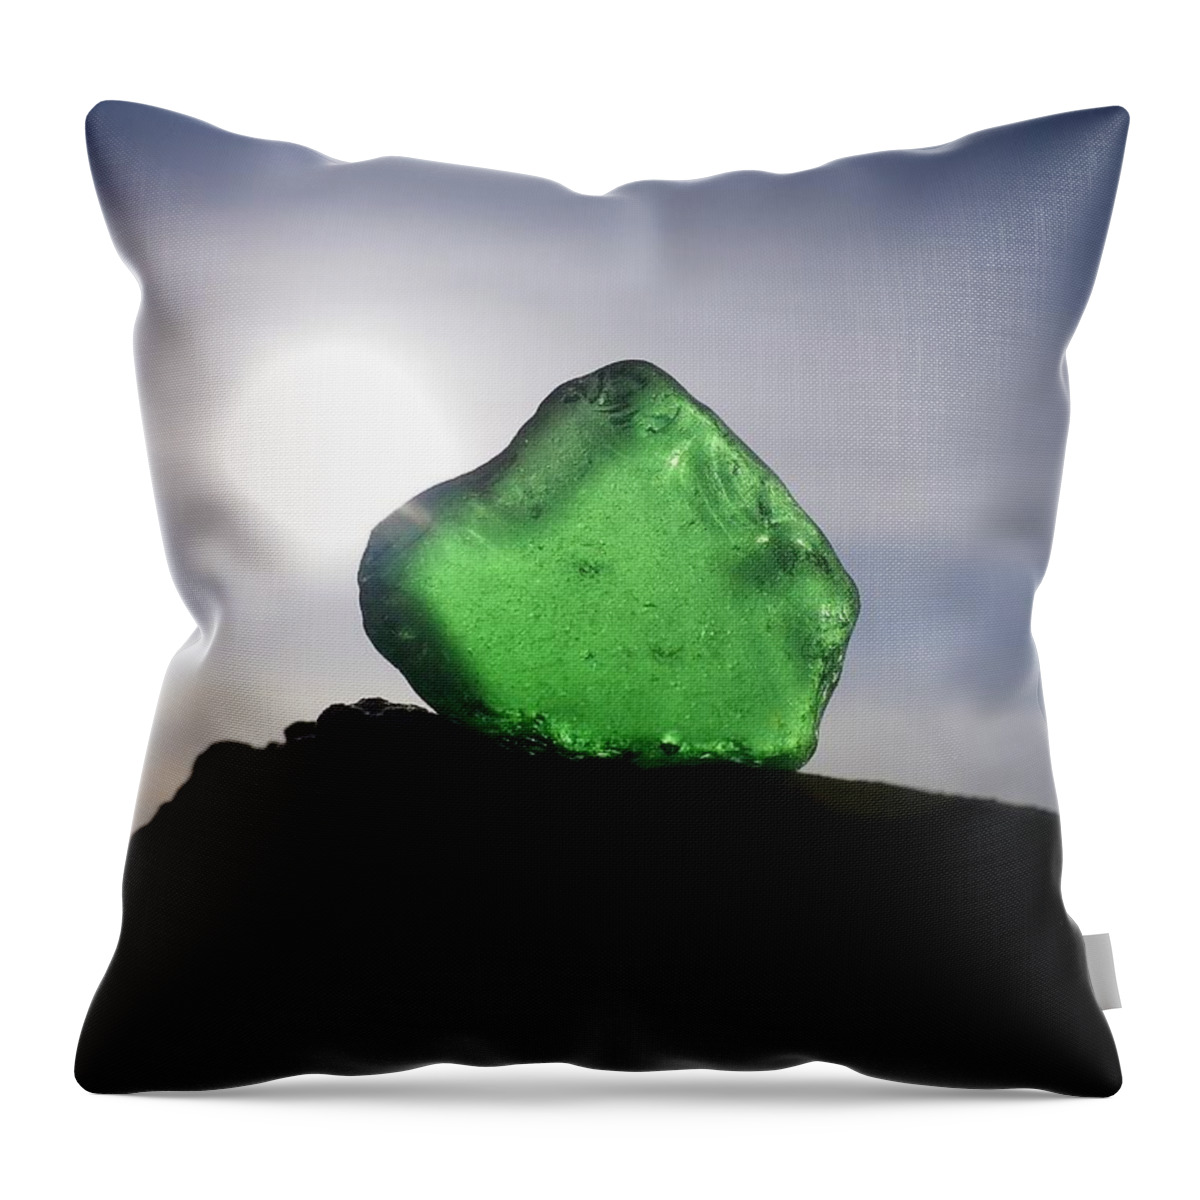 Sea Glass Throw Pillow featuring the photograph Emerald Sea Glass On Rock by Richard Brookes